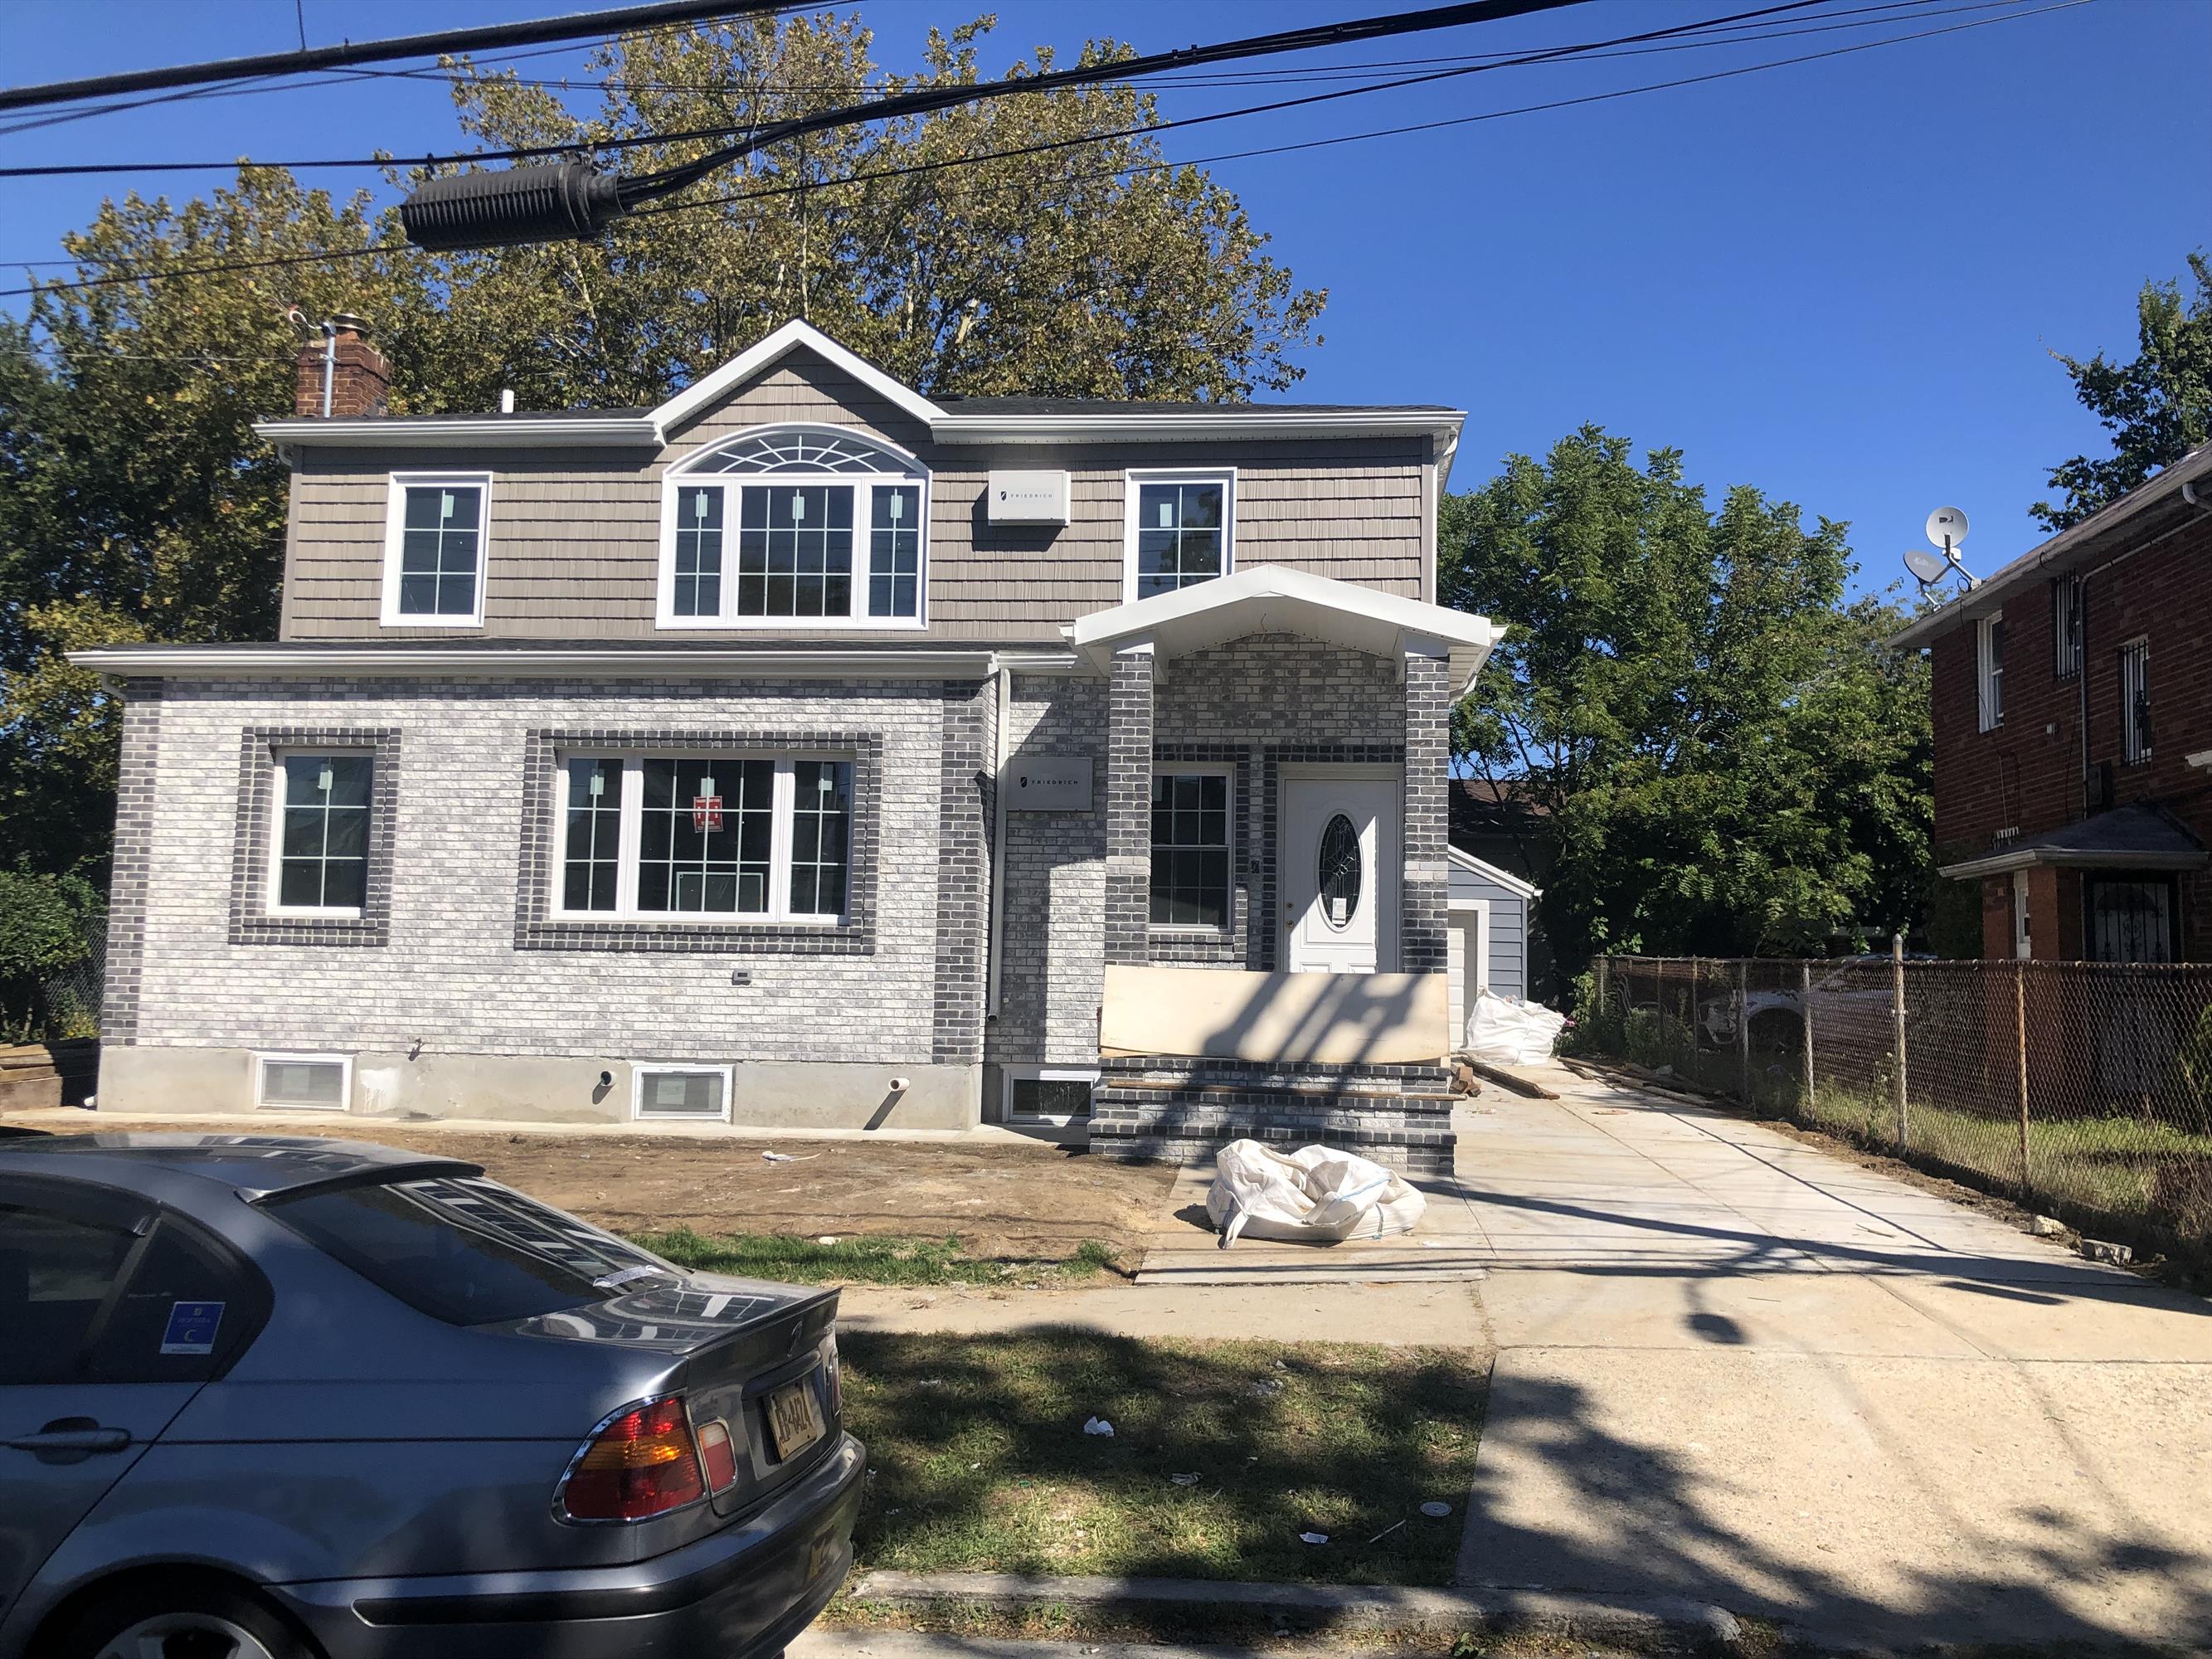 A huge and spectacular new one family (Mother and Daughter), located in Laurelton offering 6 Bedrooms, 5 full Bathrooms, finished basement, wood flooring throughout the house, private driveway, garage, spacious yard. A must see!
For previews, please contact Tony “Your Housing Specialist” at (718) 297-0505 